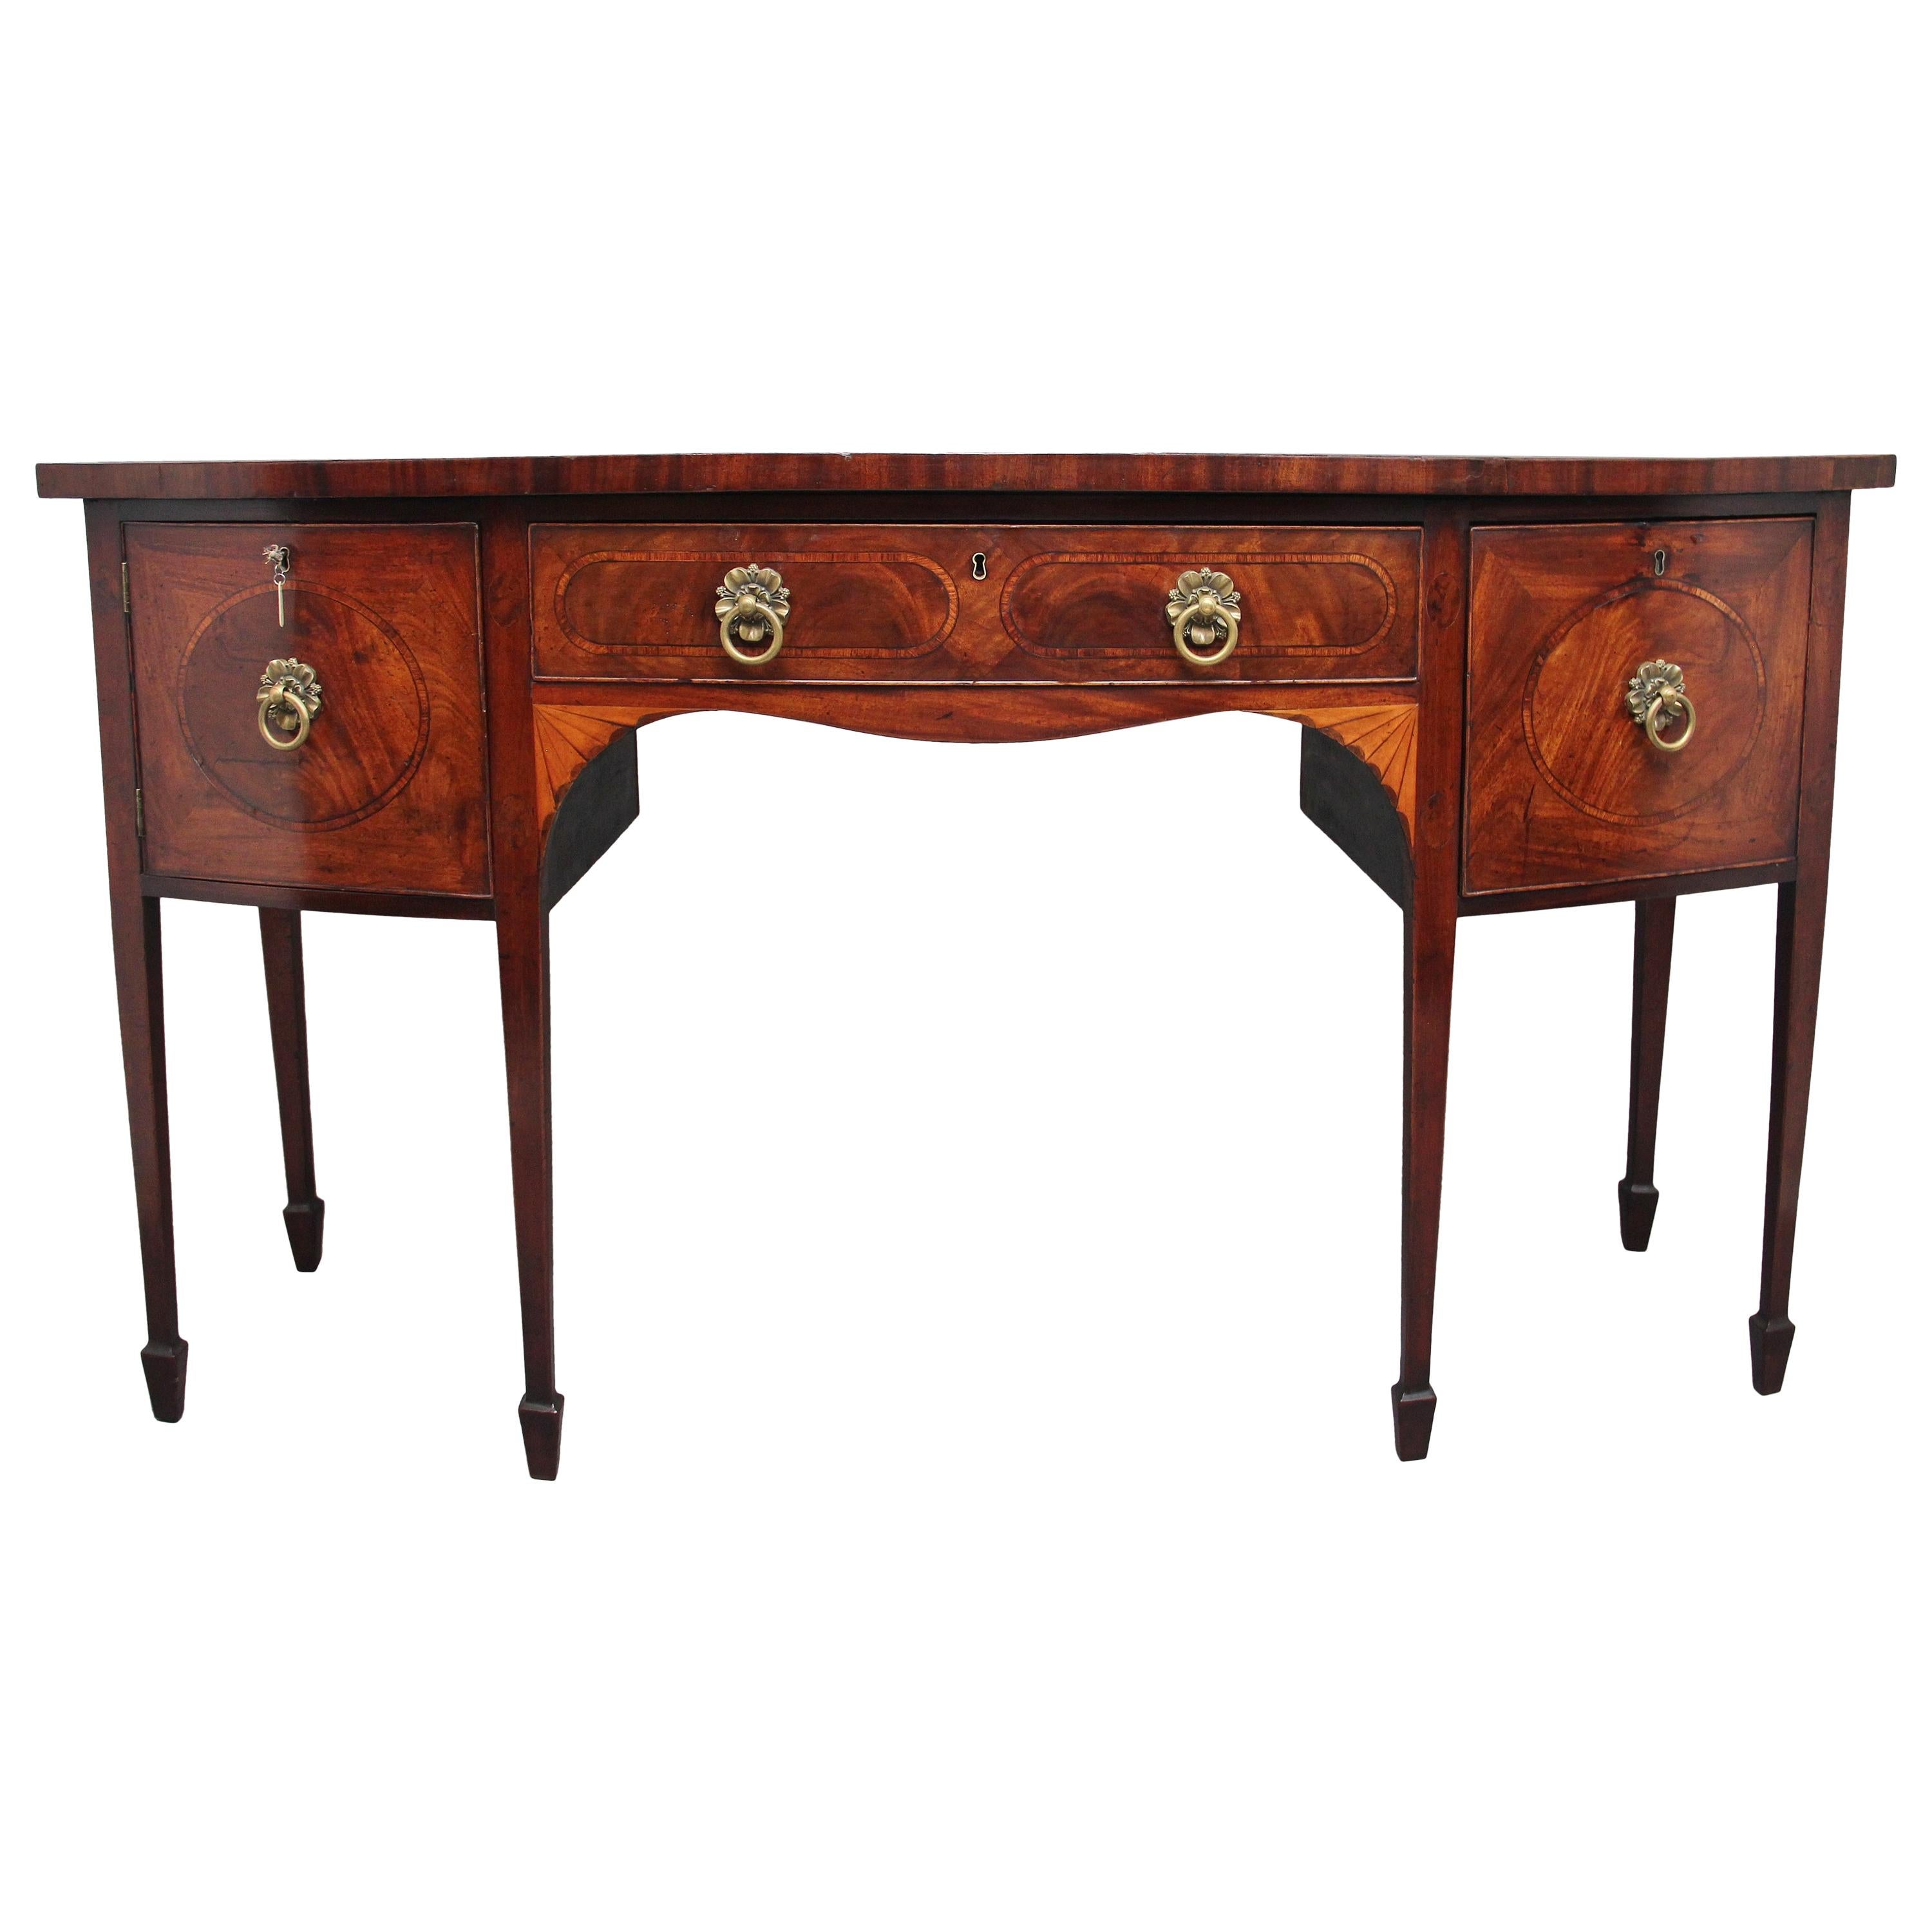 Early 19th Century Inlaid Mahogany Bow Front Sideboard